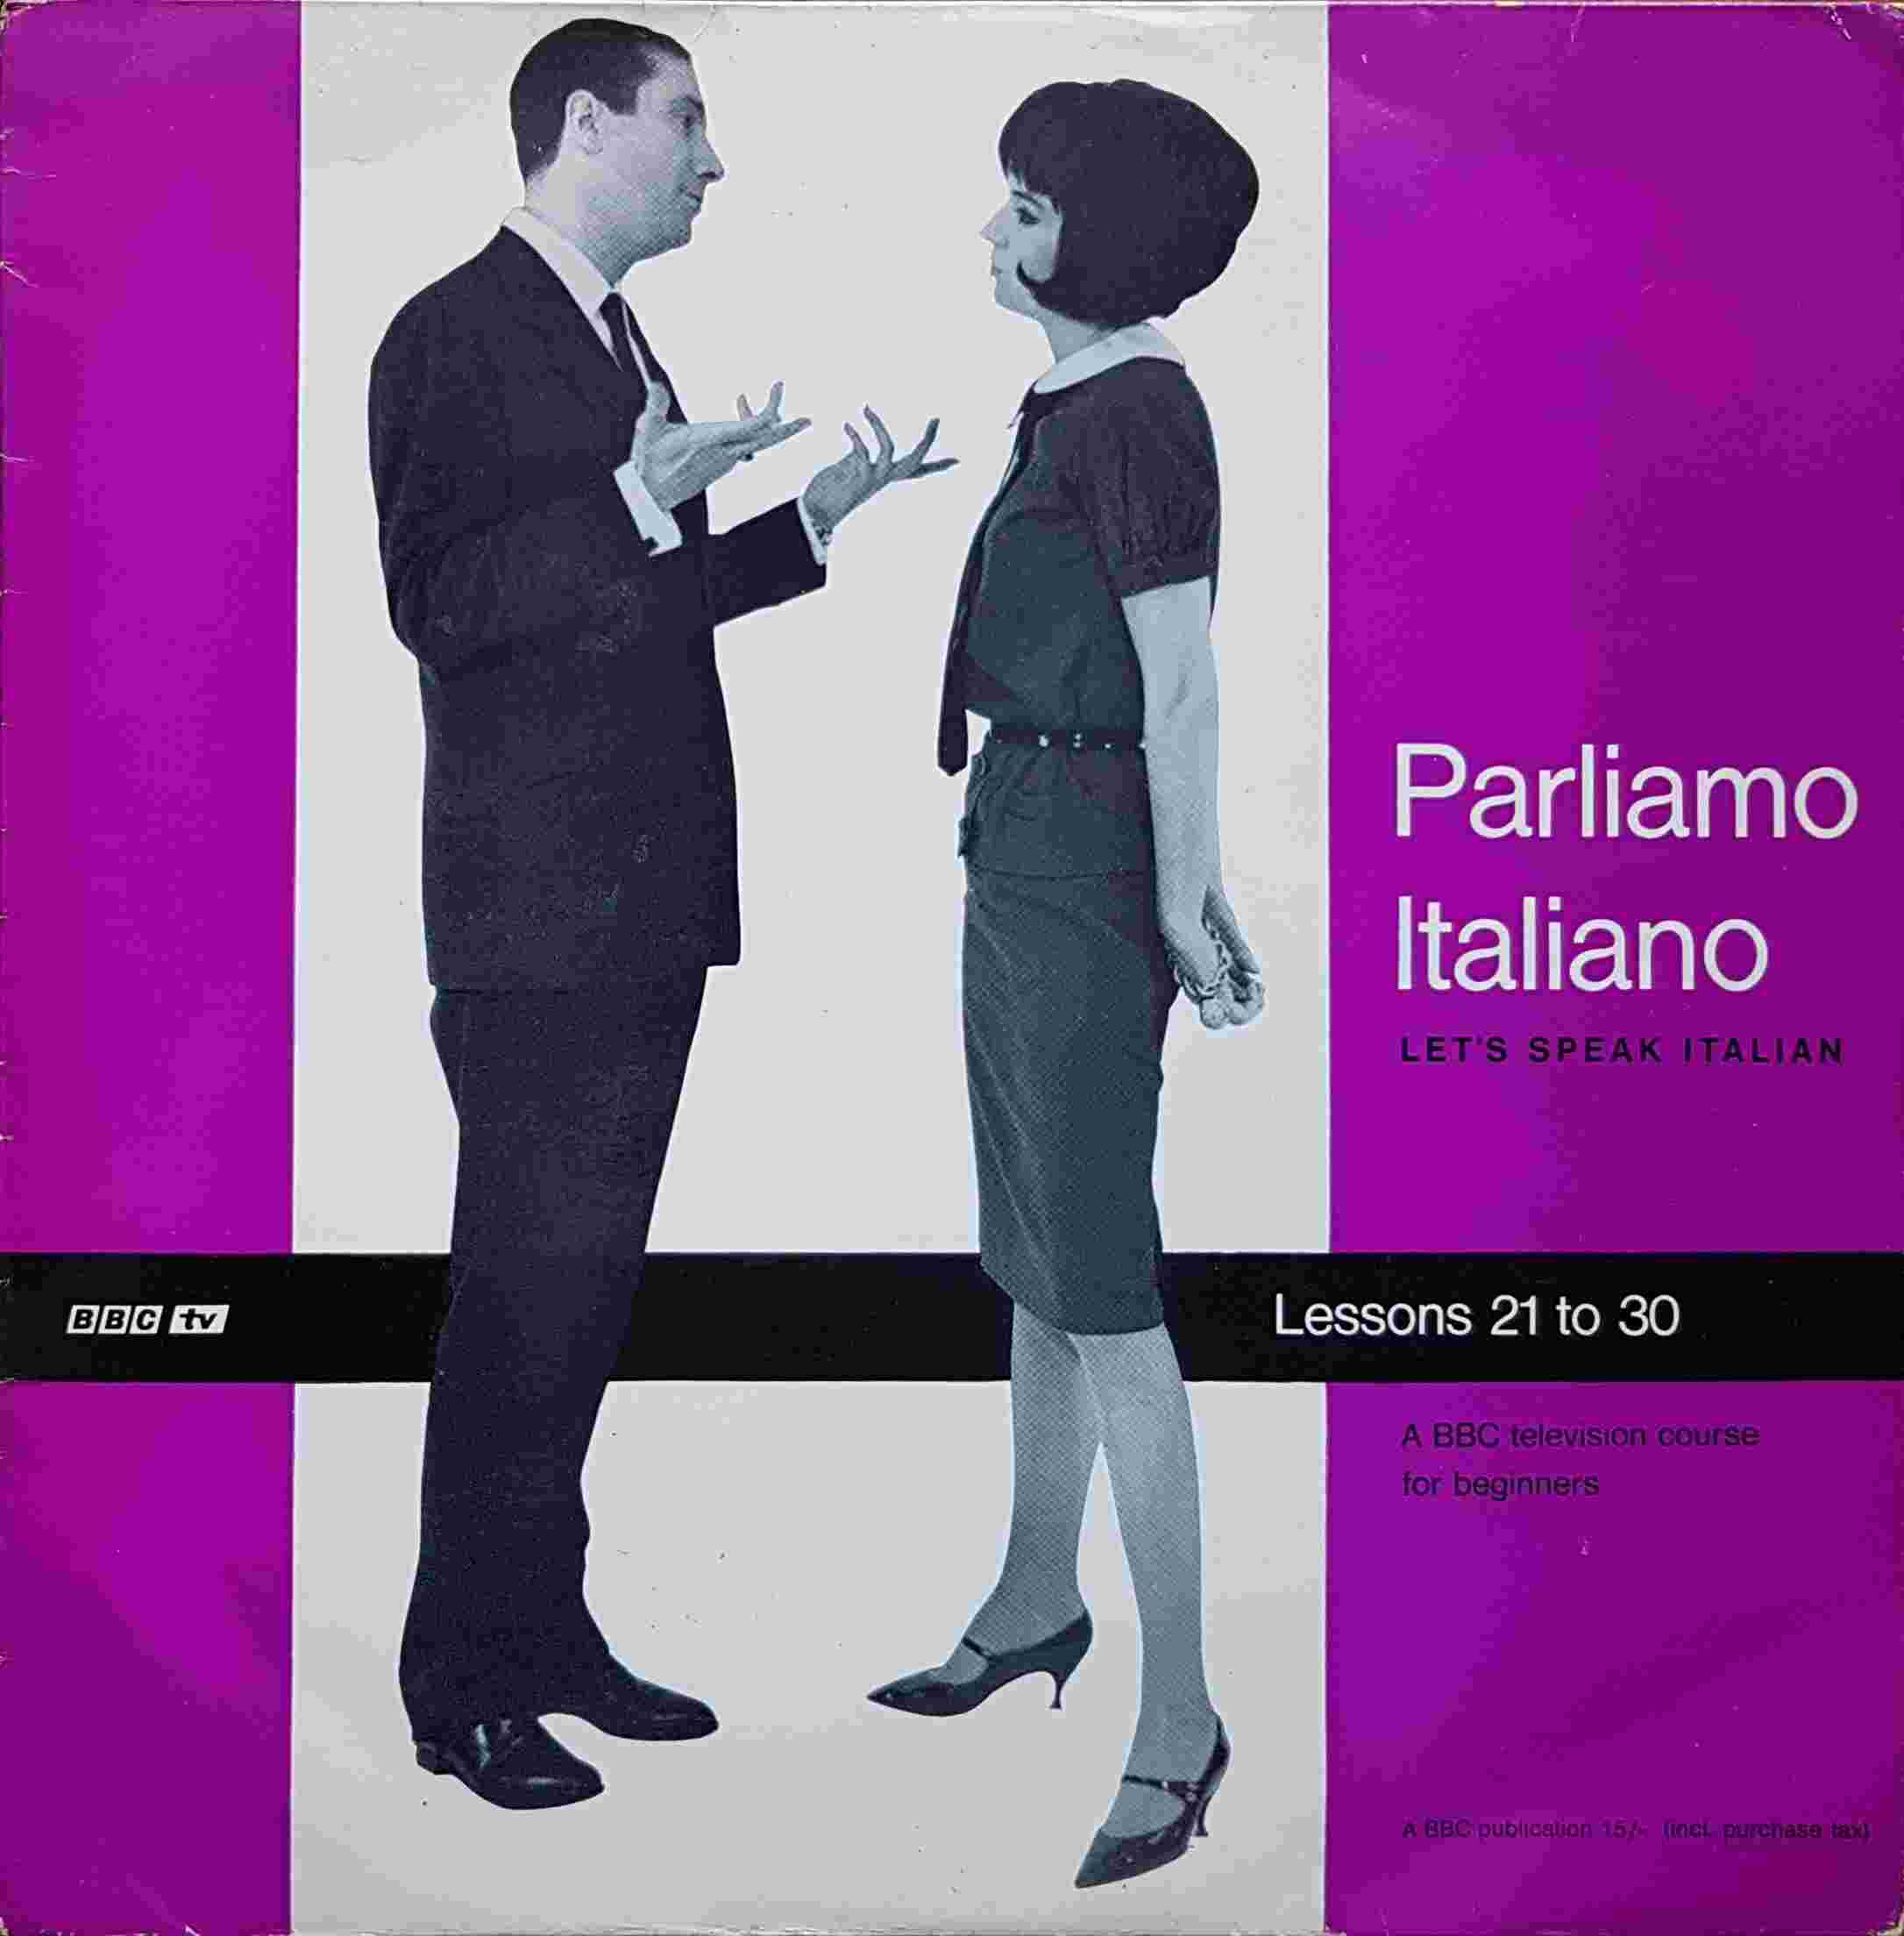 Picture of OP 5/6 Parliamo Italiano - Let's Speak Italian lessons 21 - 30 by artist Toni Cerutti from the BBC albums - Records and Tapes library